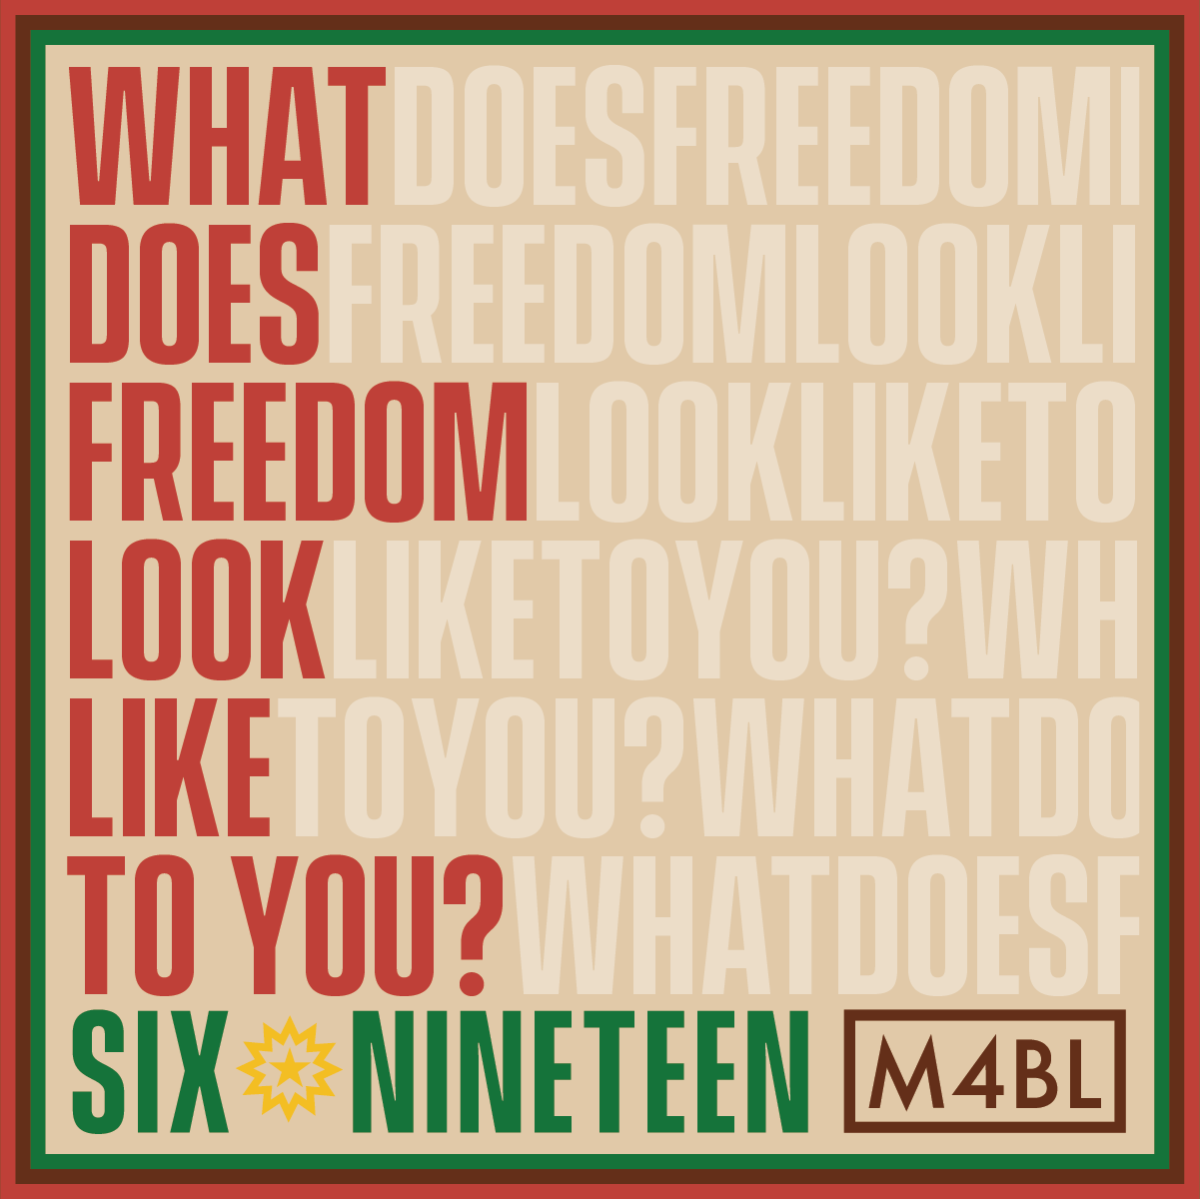 What does freedom look like to you? Six Nineteen - M4BL